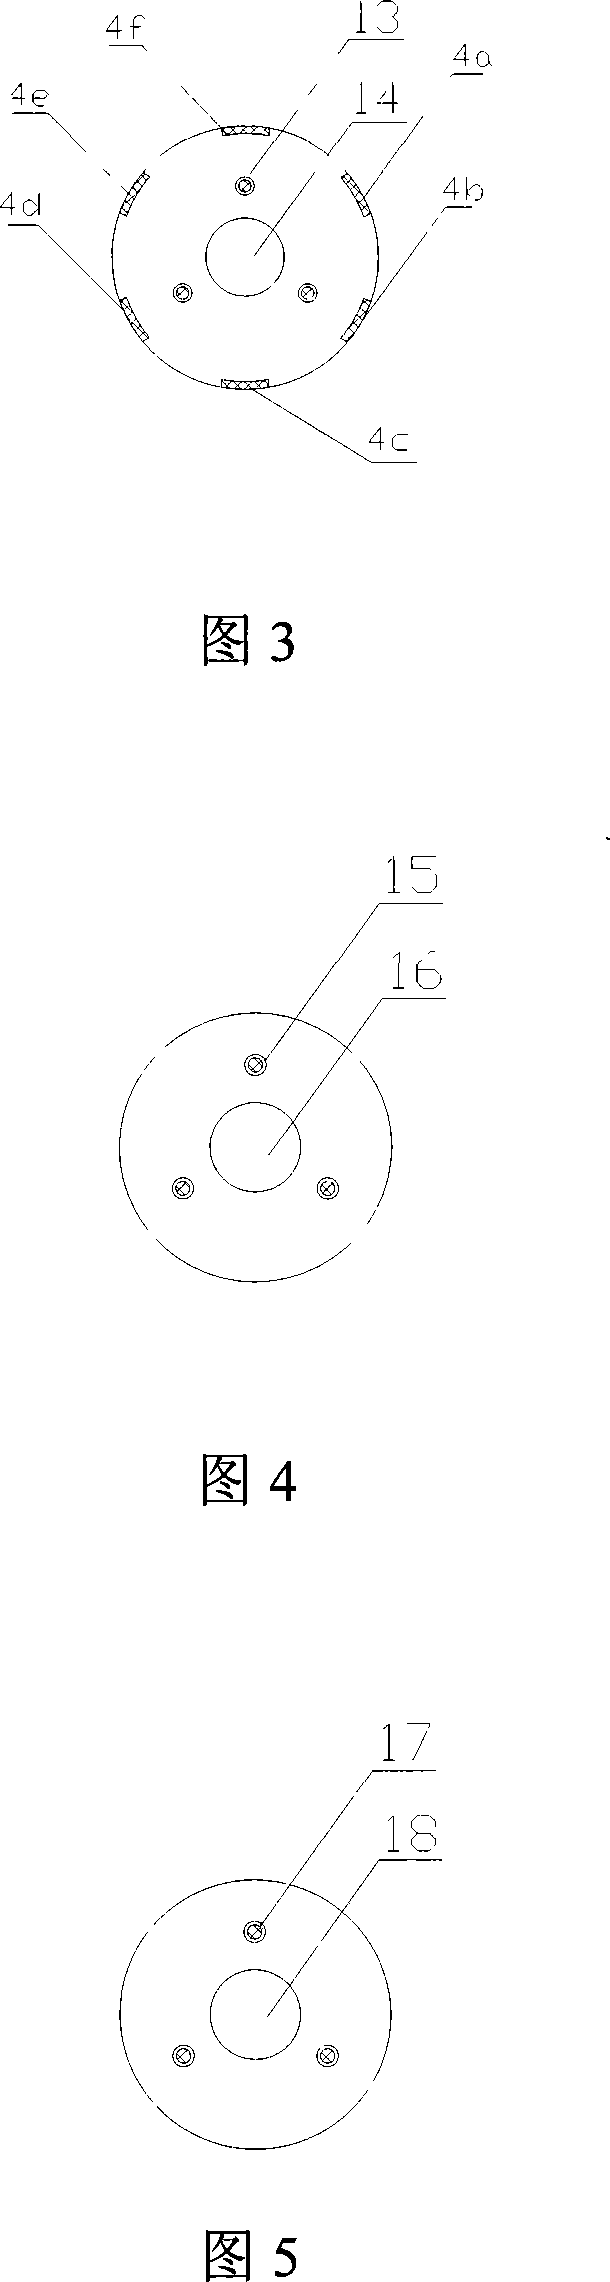 Space bending shape memory alloy driver and thereof drive control device thereof